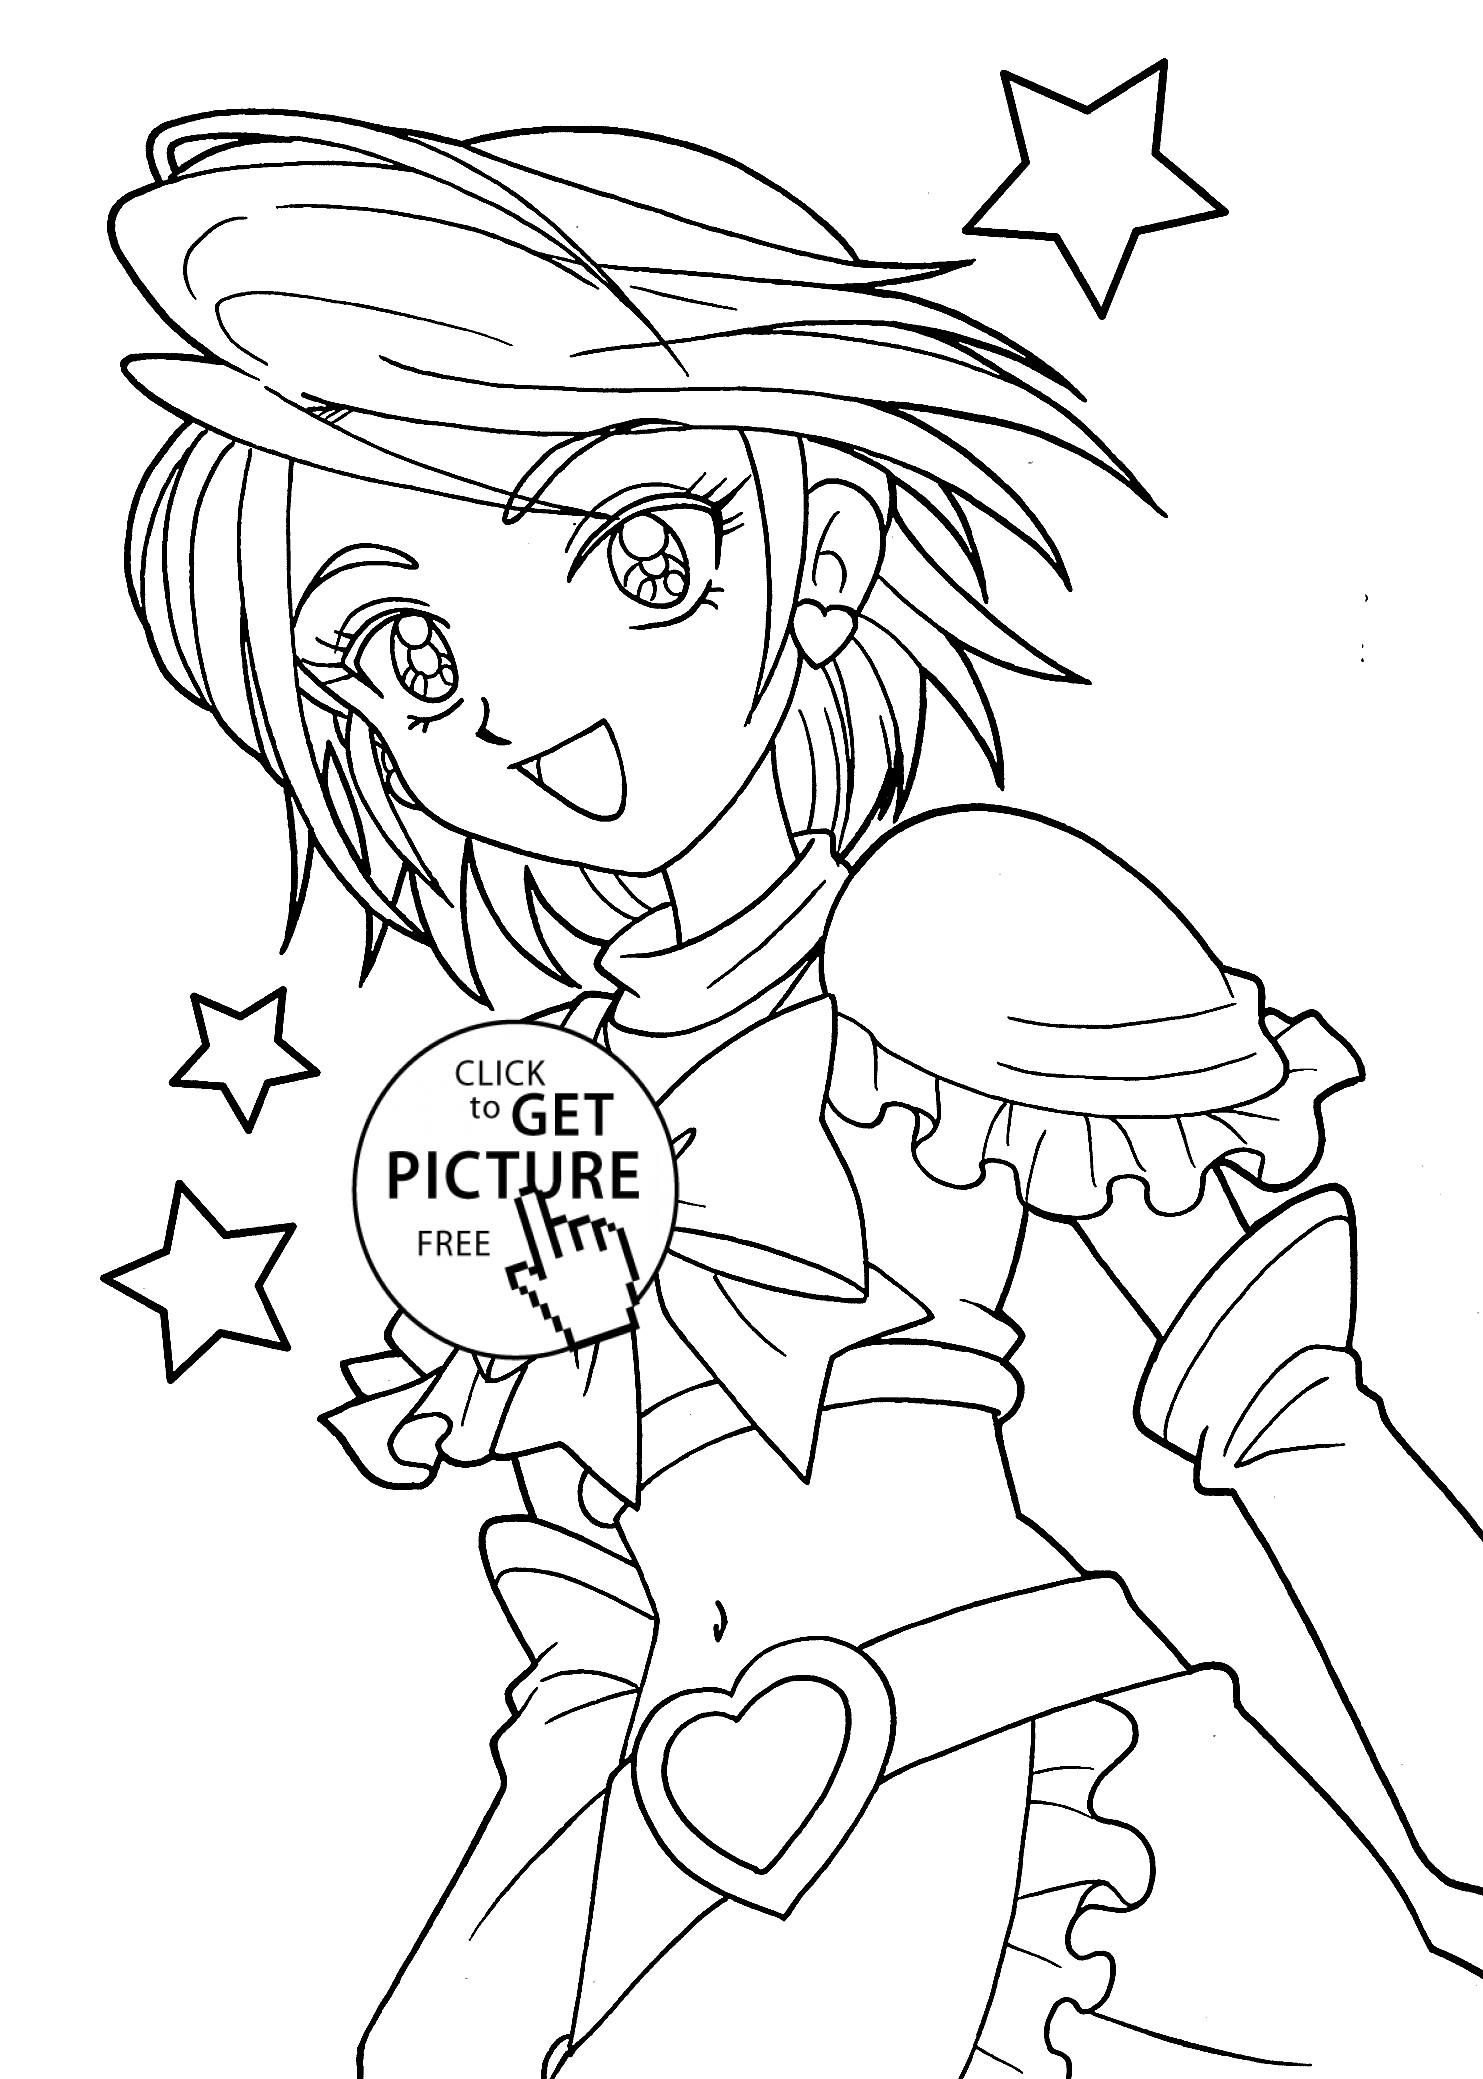 Coloring Pages For Girls To Print
 Pretty cure coloring pages for girls printable free